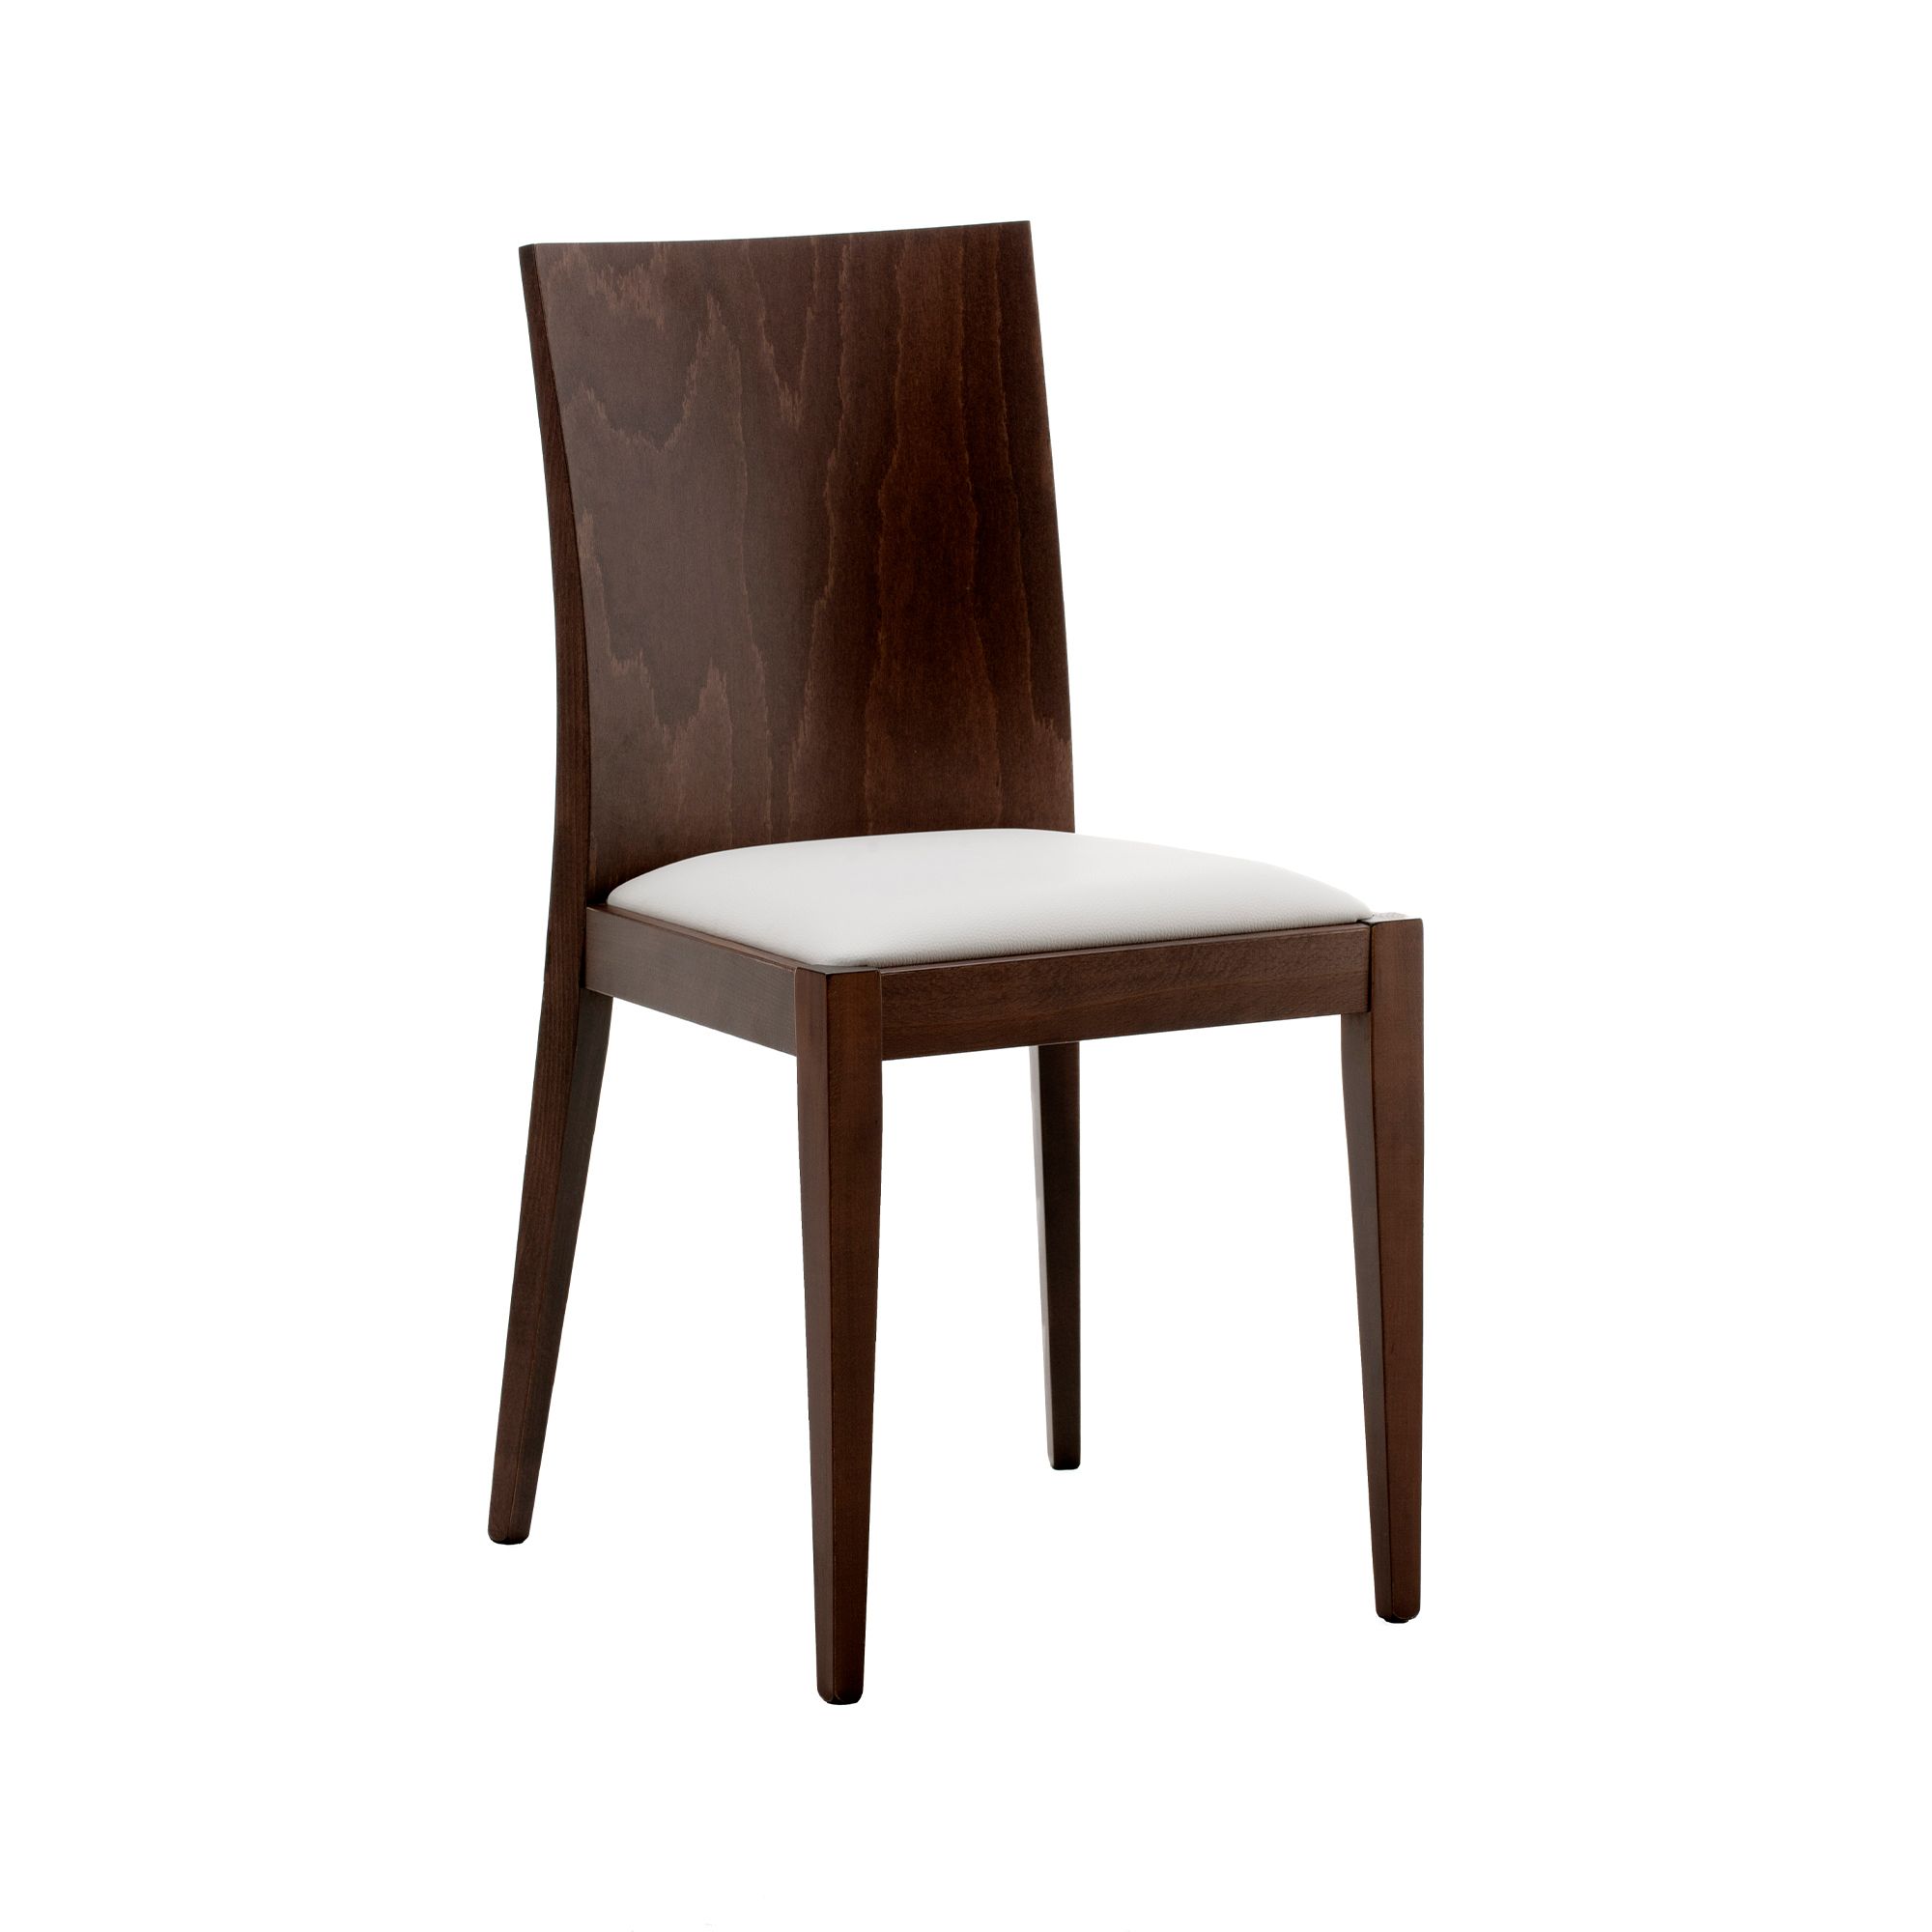 Model 841 chair in classic style